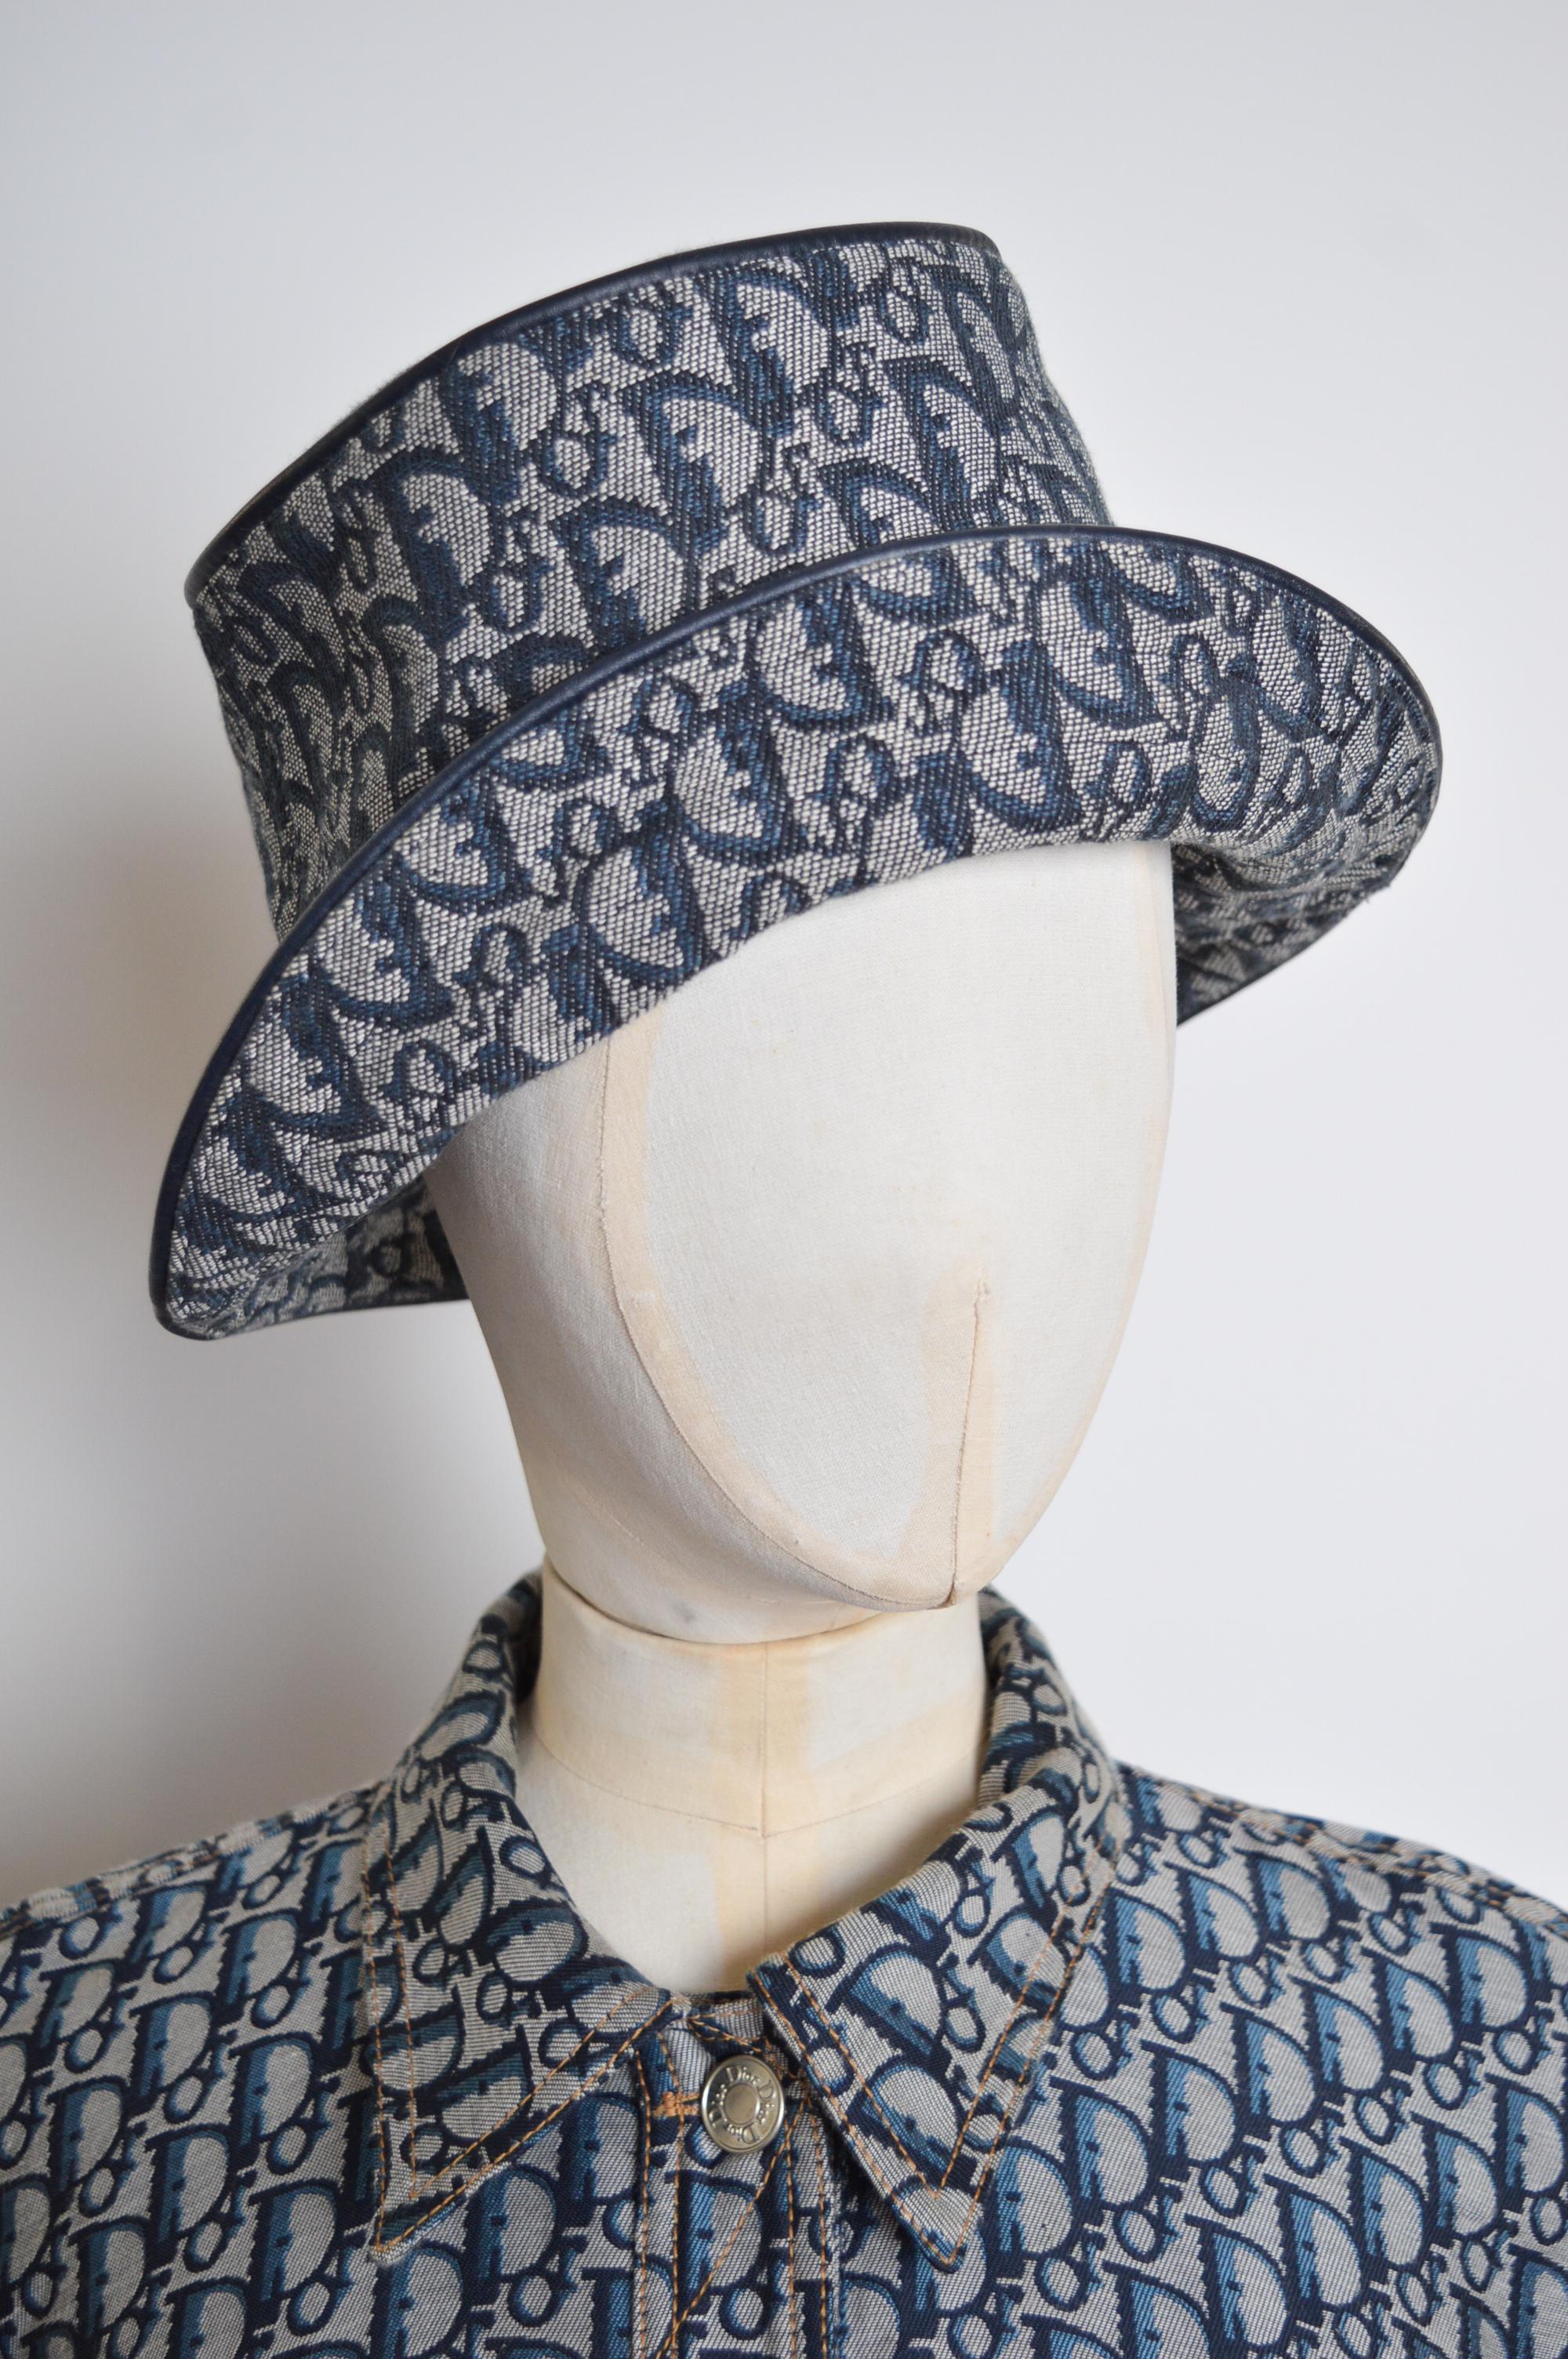 Absolutely superb early 2000's John Galliano for Christian Dior, monogram patterned Jacquard Hat in a Blue denim Obliqué Cotton with a Calfskin leather Trim !

MADE IN FRANCE !

Features :
90% Cotton 10% Calfskin
Lining - Nylon
Brim 2.5